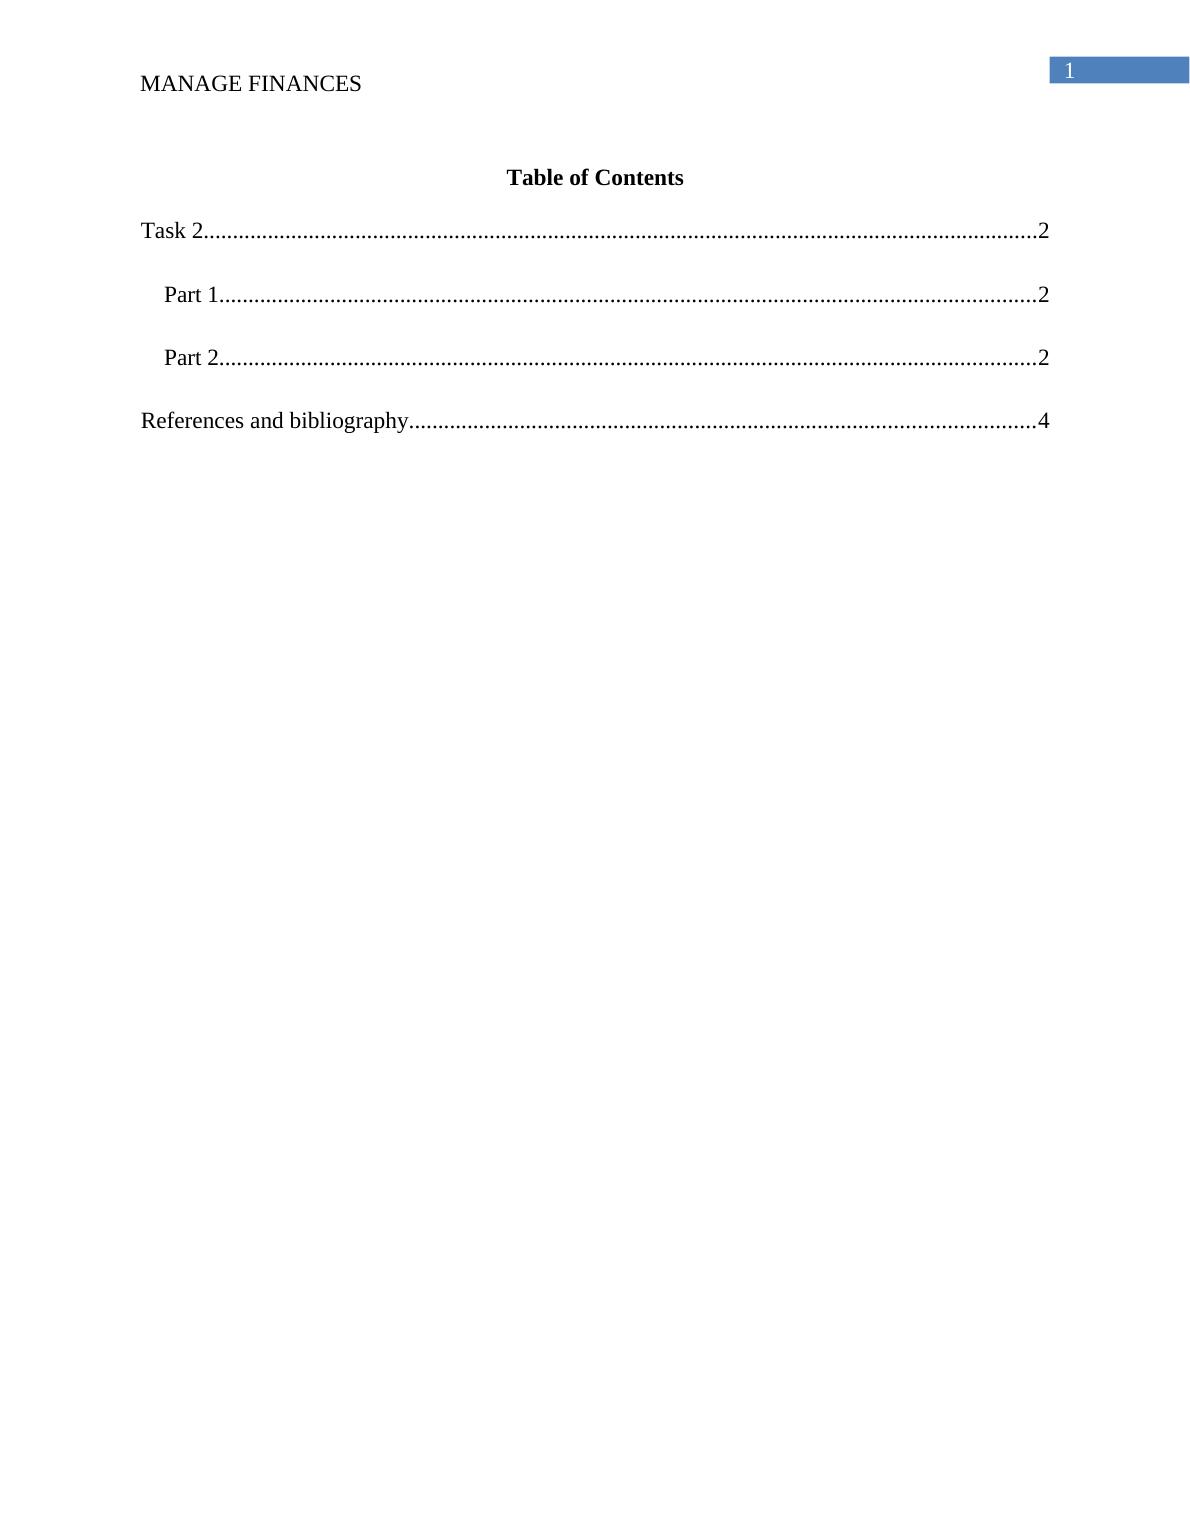 (Docx) Unit 2 Managing Financial Resources Sample Assignment_2